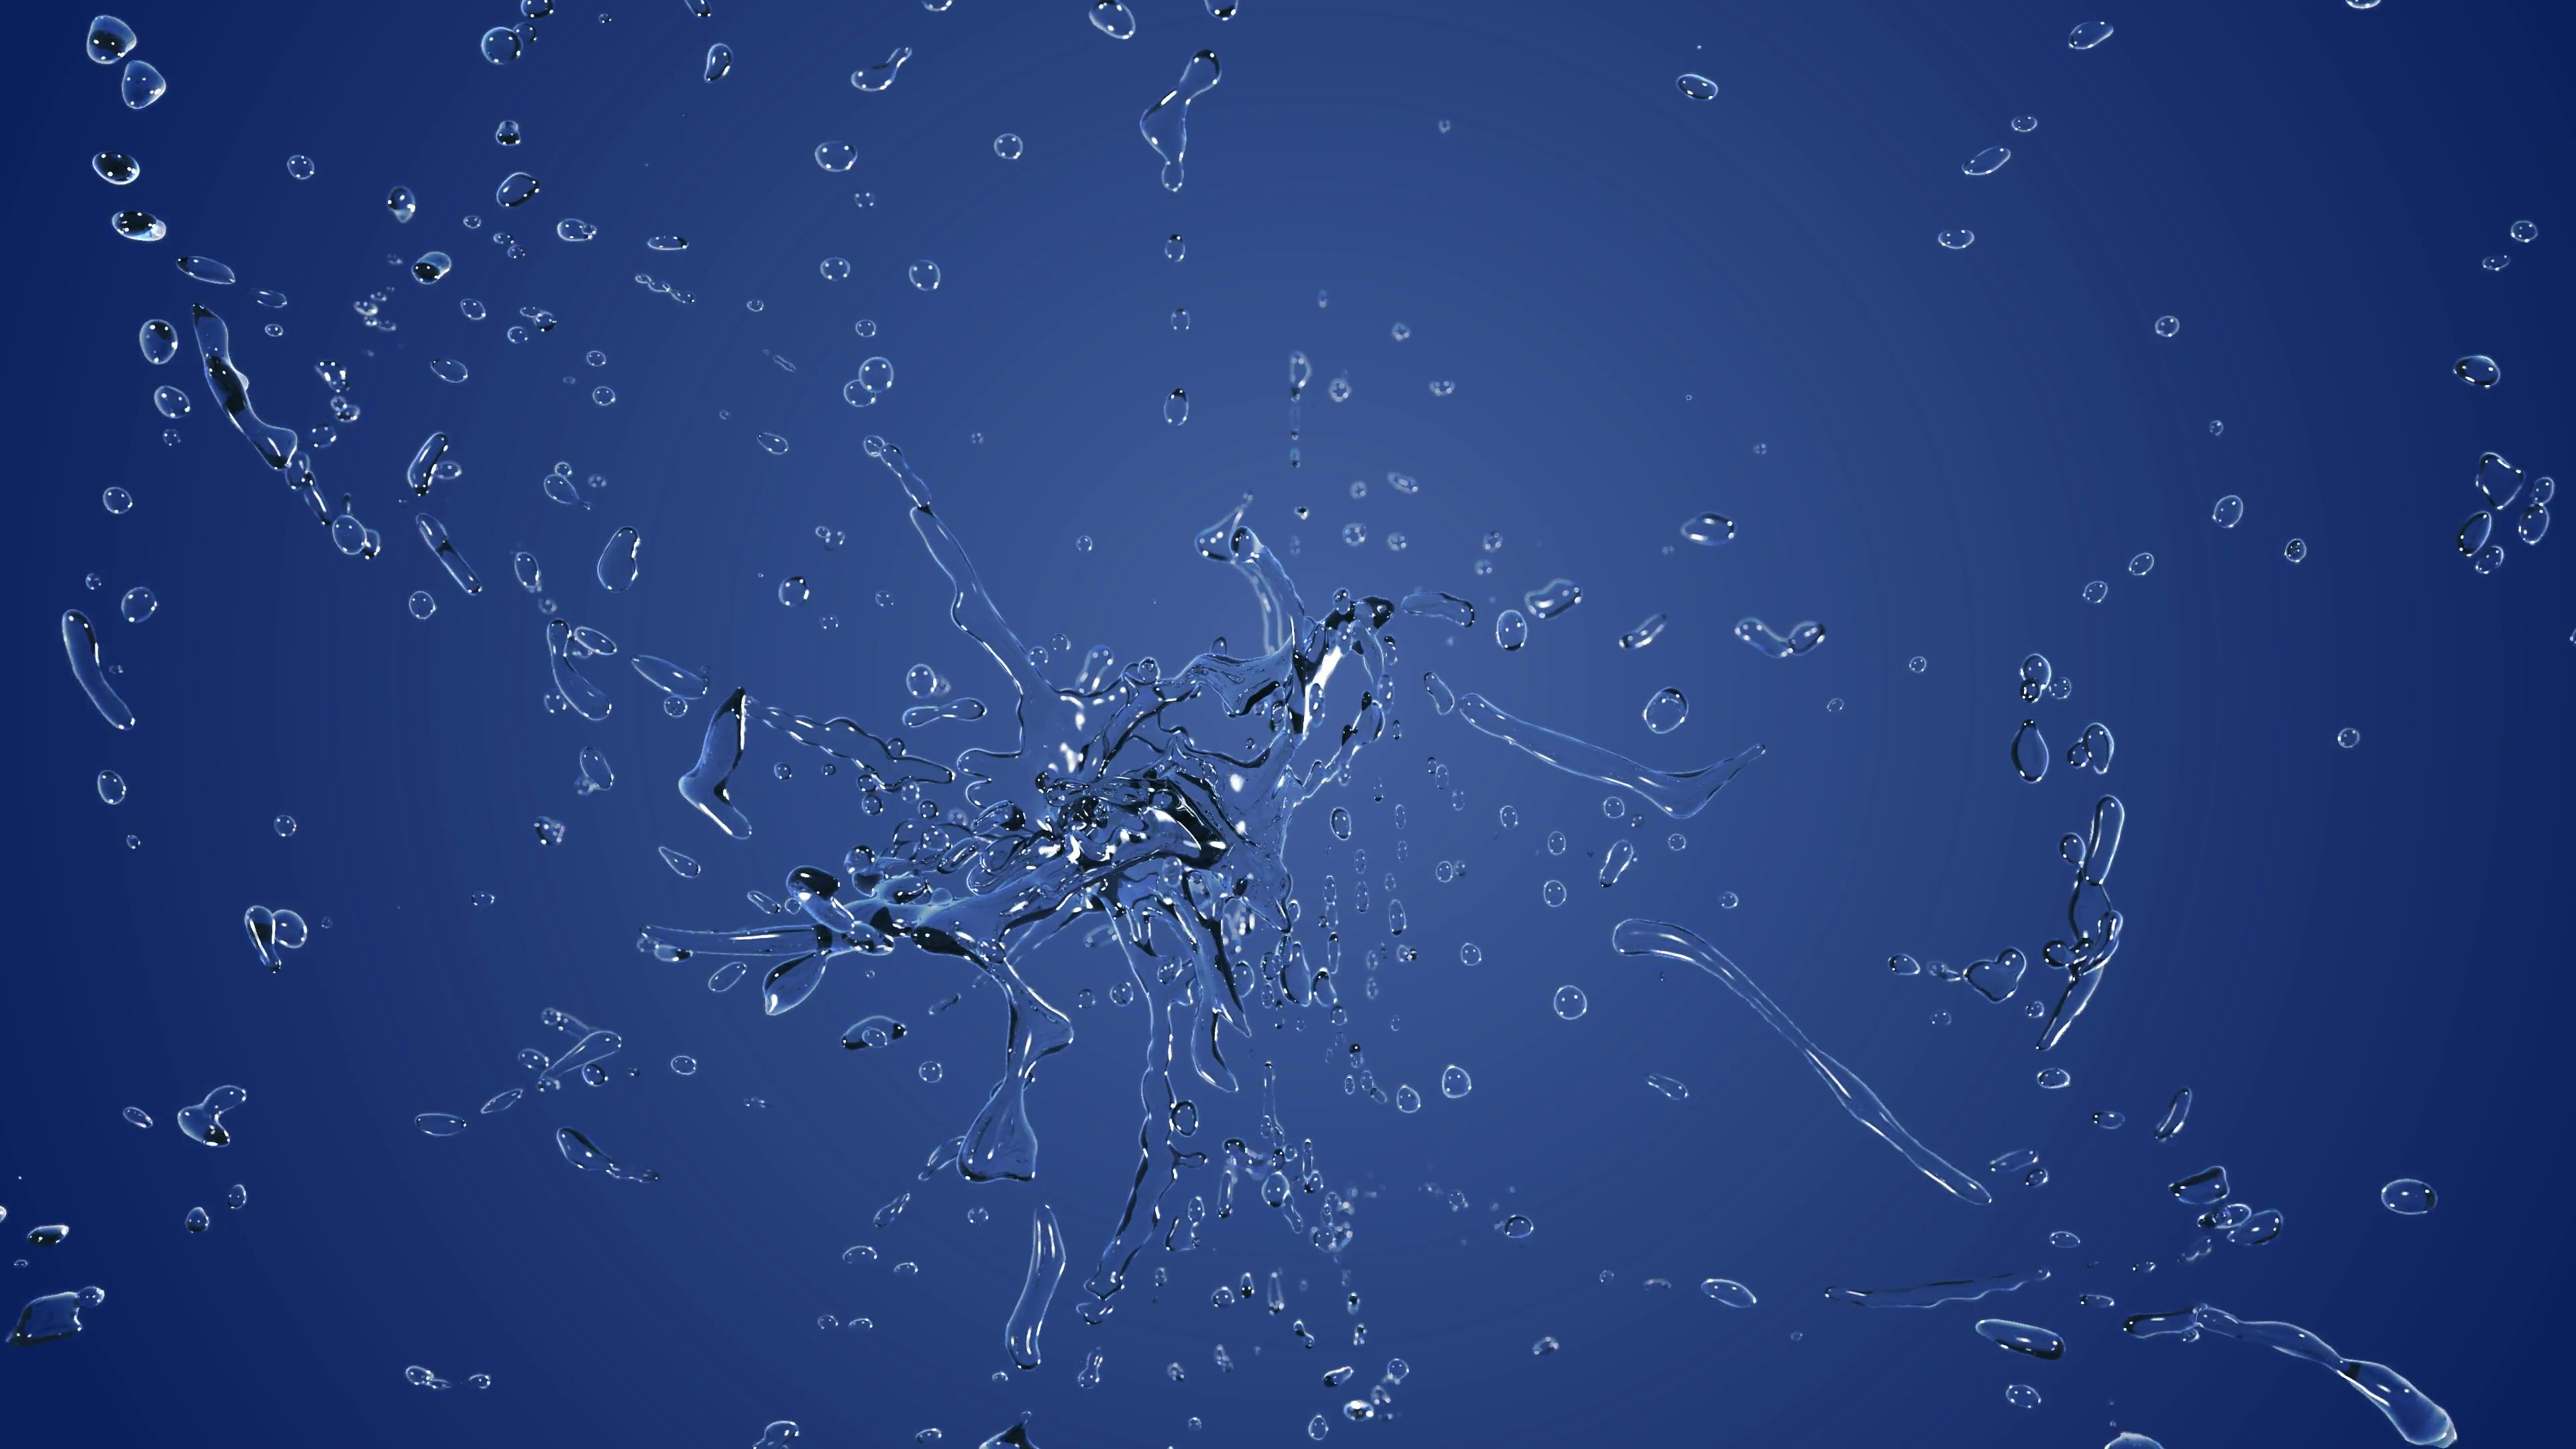 3840x2160 The splashing water explosion on blue background. Liquid in slow motion.  Alpha channel mask included. 4K Motion Background - VideoBlocks